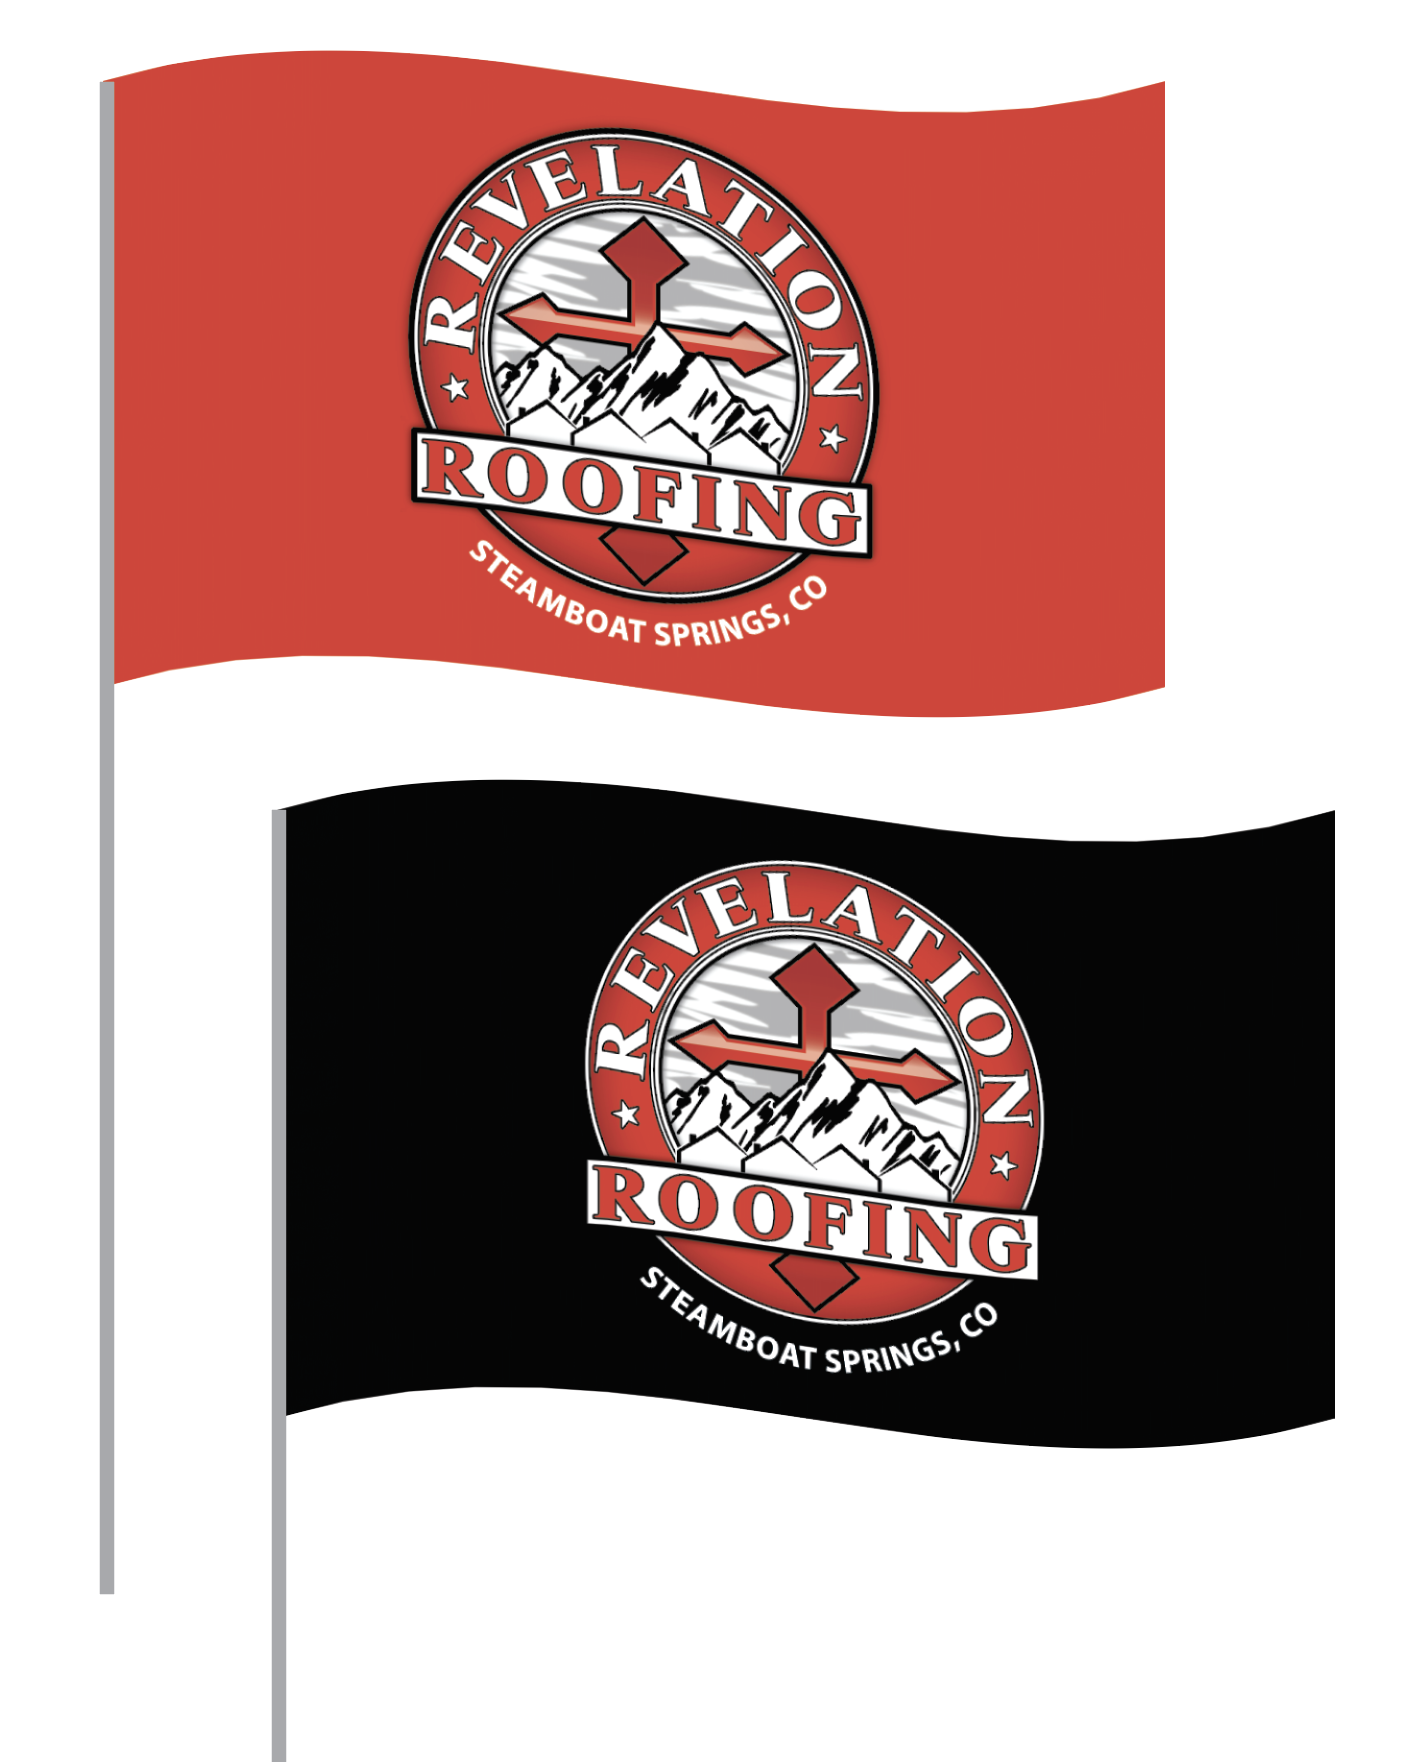 Nylon Flags - printed two sides full color